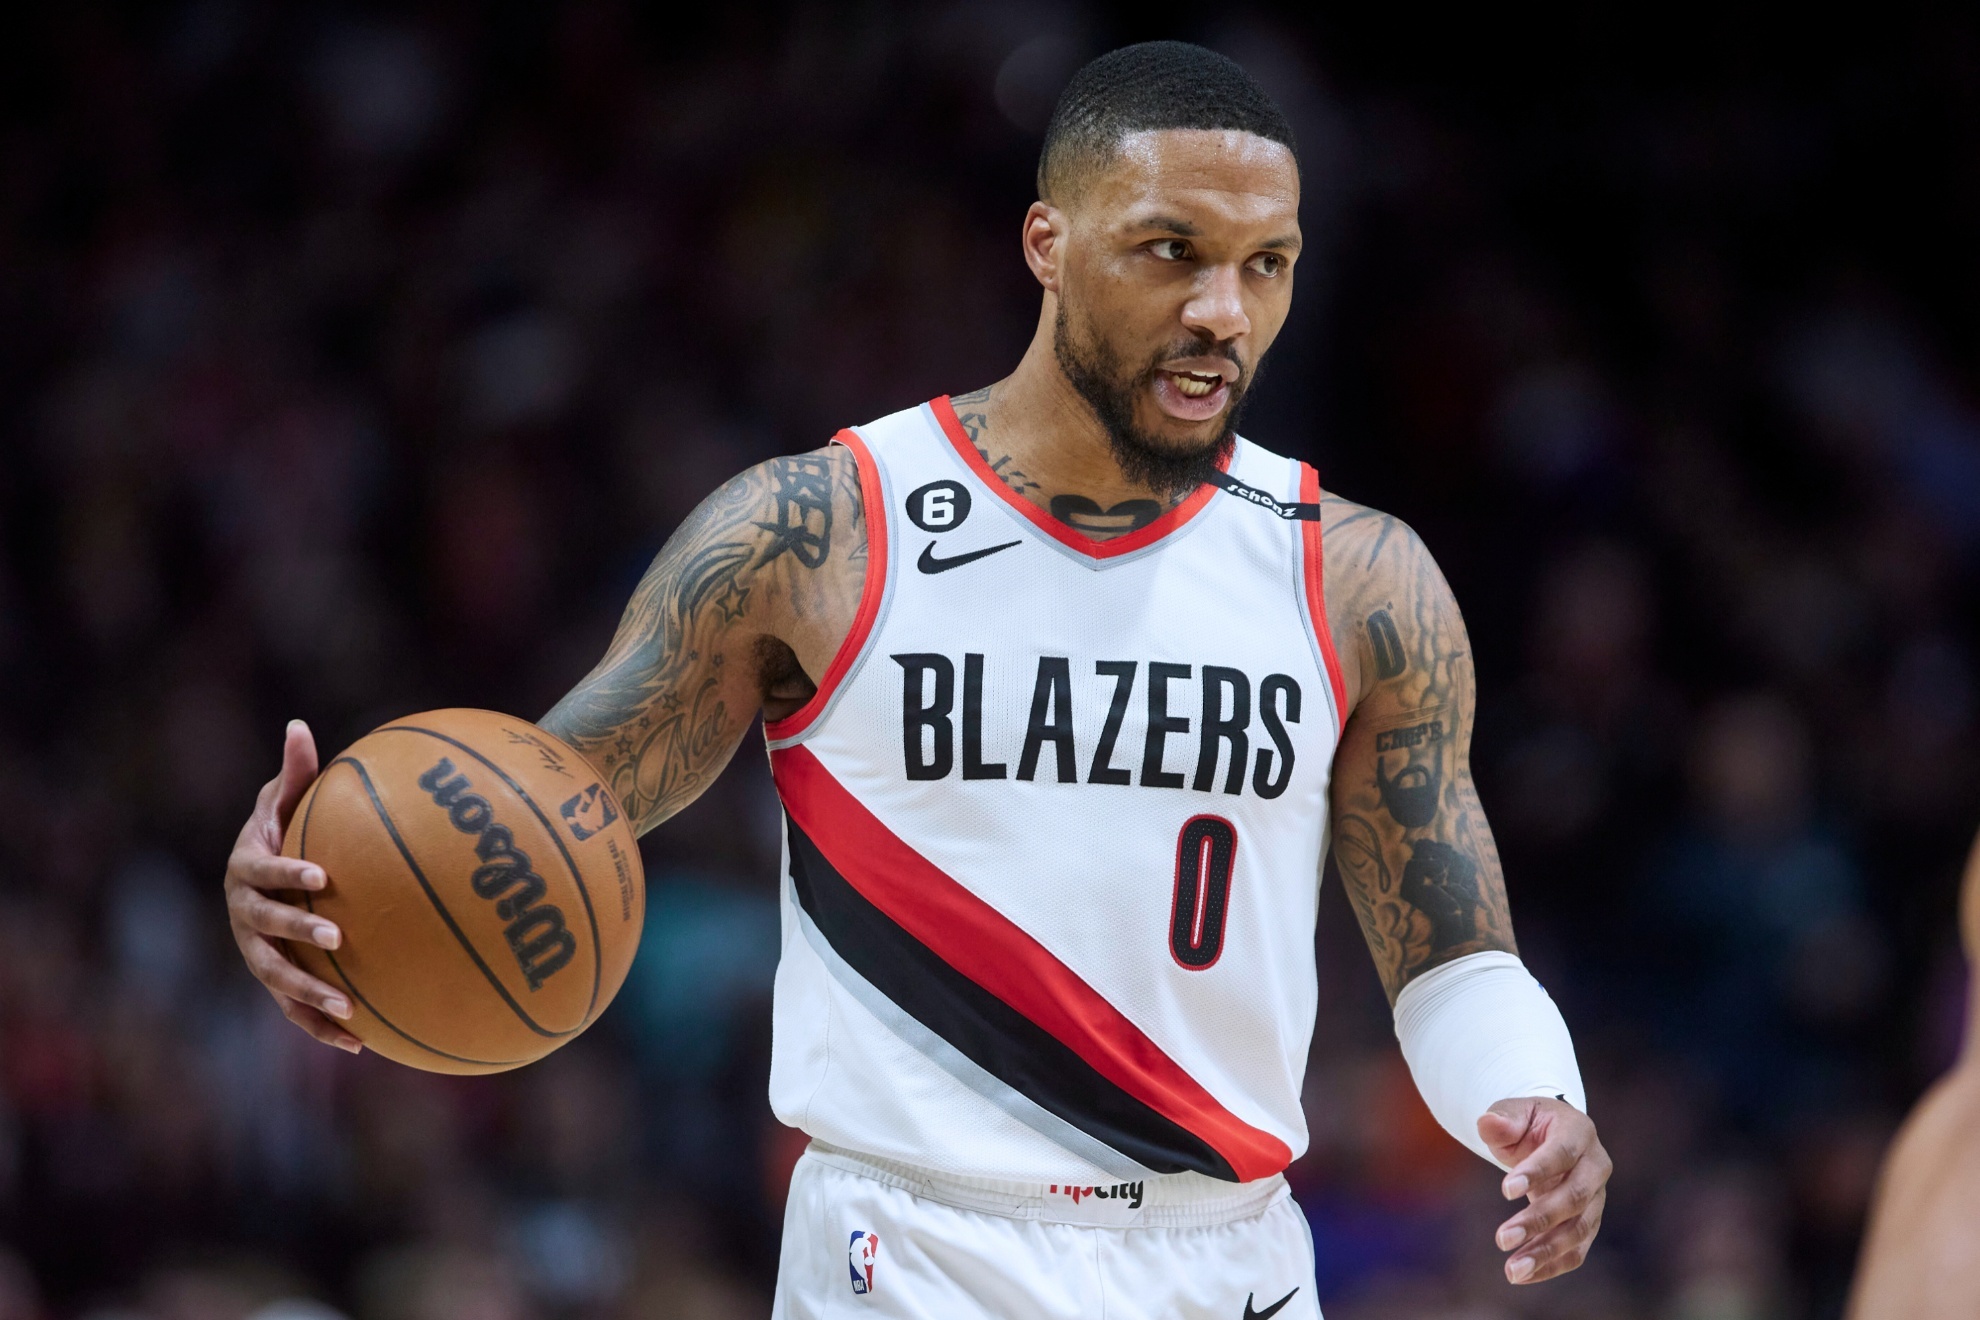 Damian Lillard wants to be traded from the Trail Blazers.